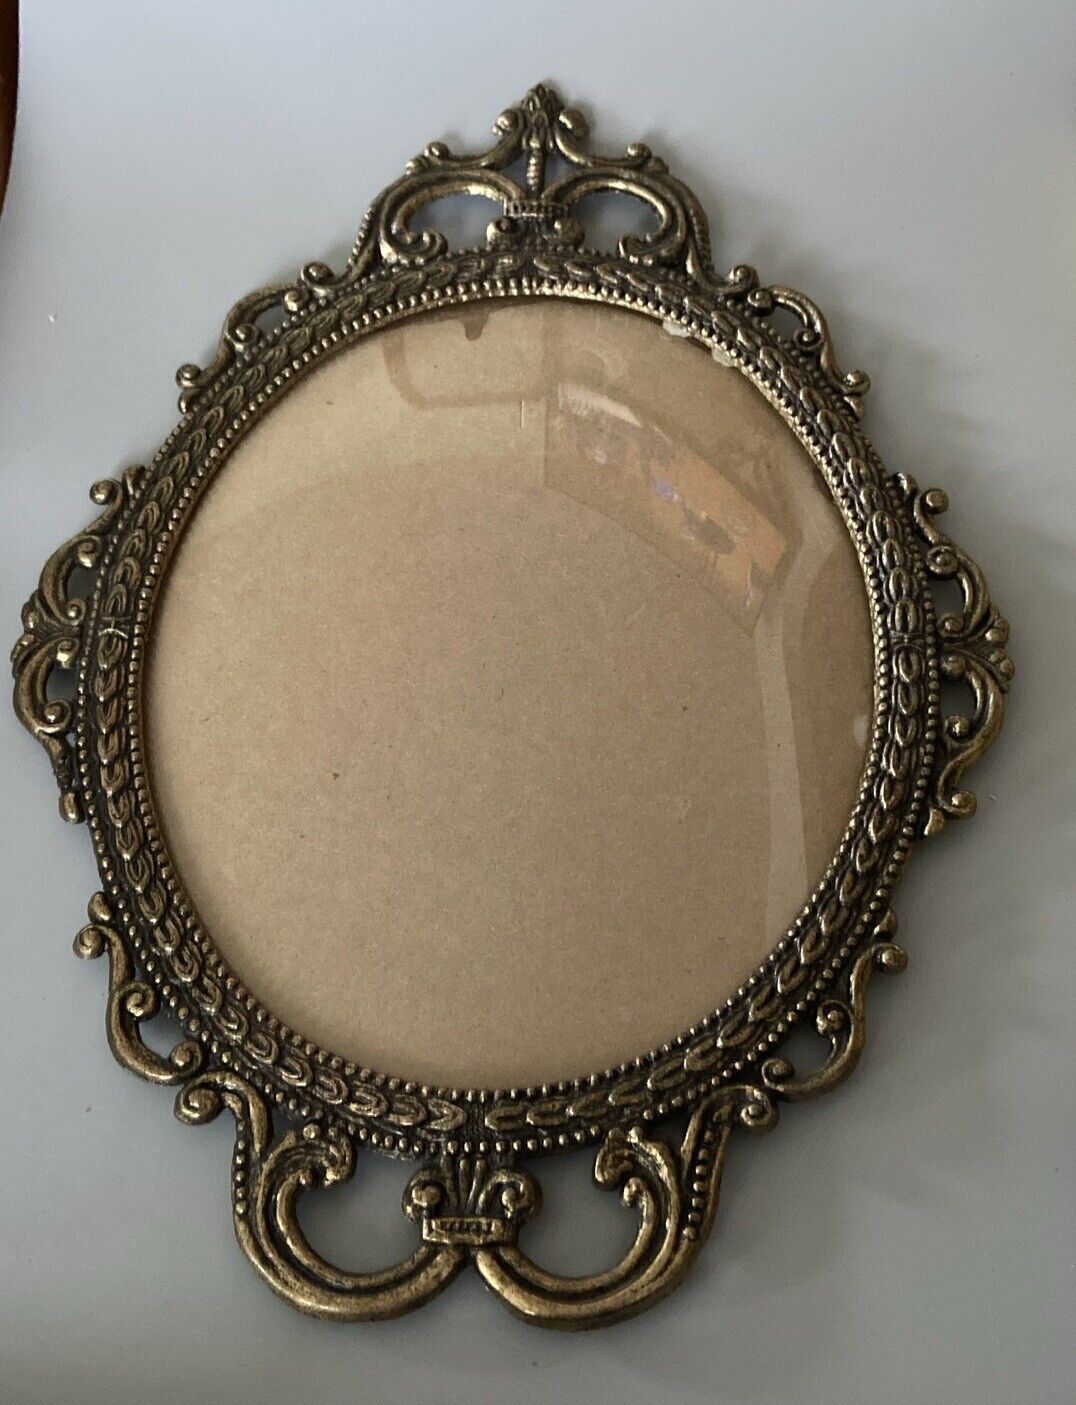 Vintage 18” Ornate Antique Brass Wall 11x9 Convex/ Bubble Glass Picture Frame